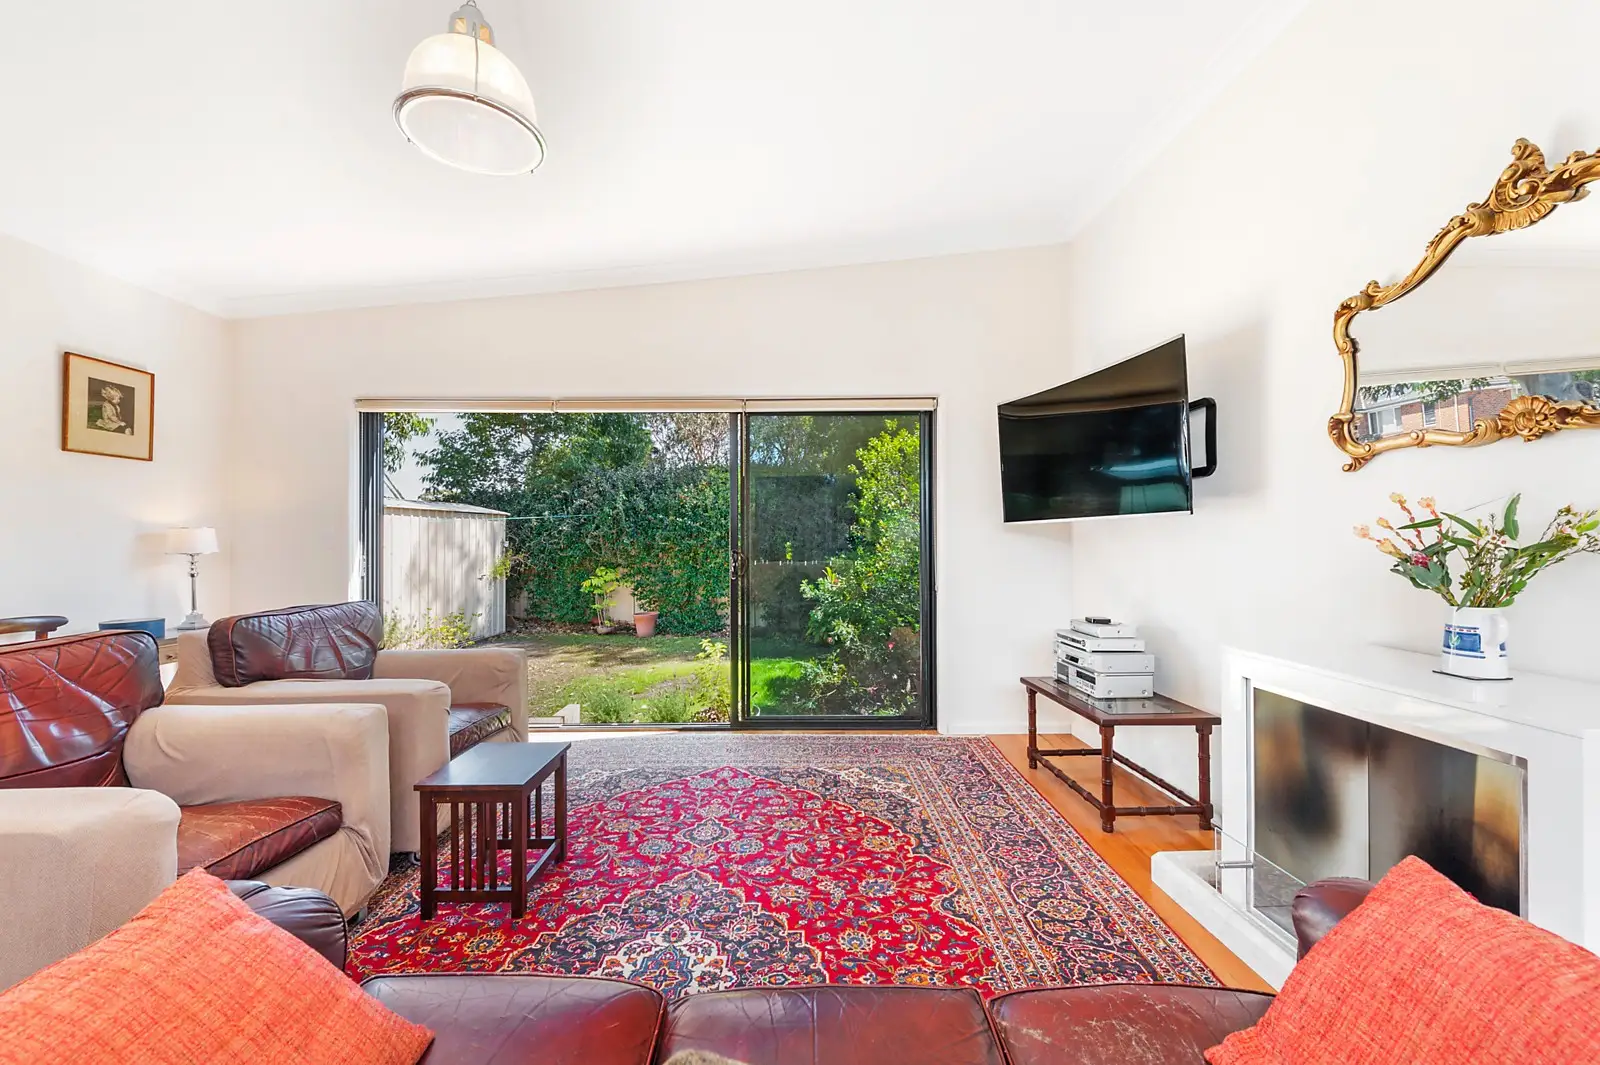 Photo #1: 6 Kenny Avenue, Chifley - Sold by Sydney Sotheby's International Realty